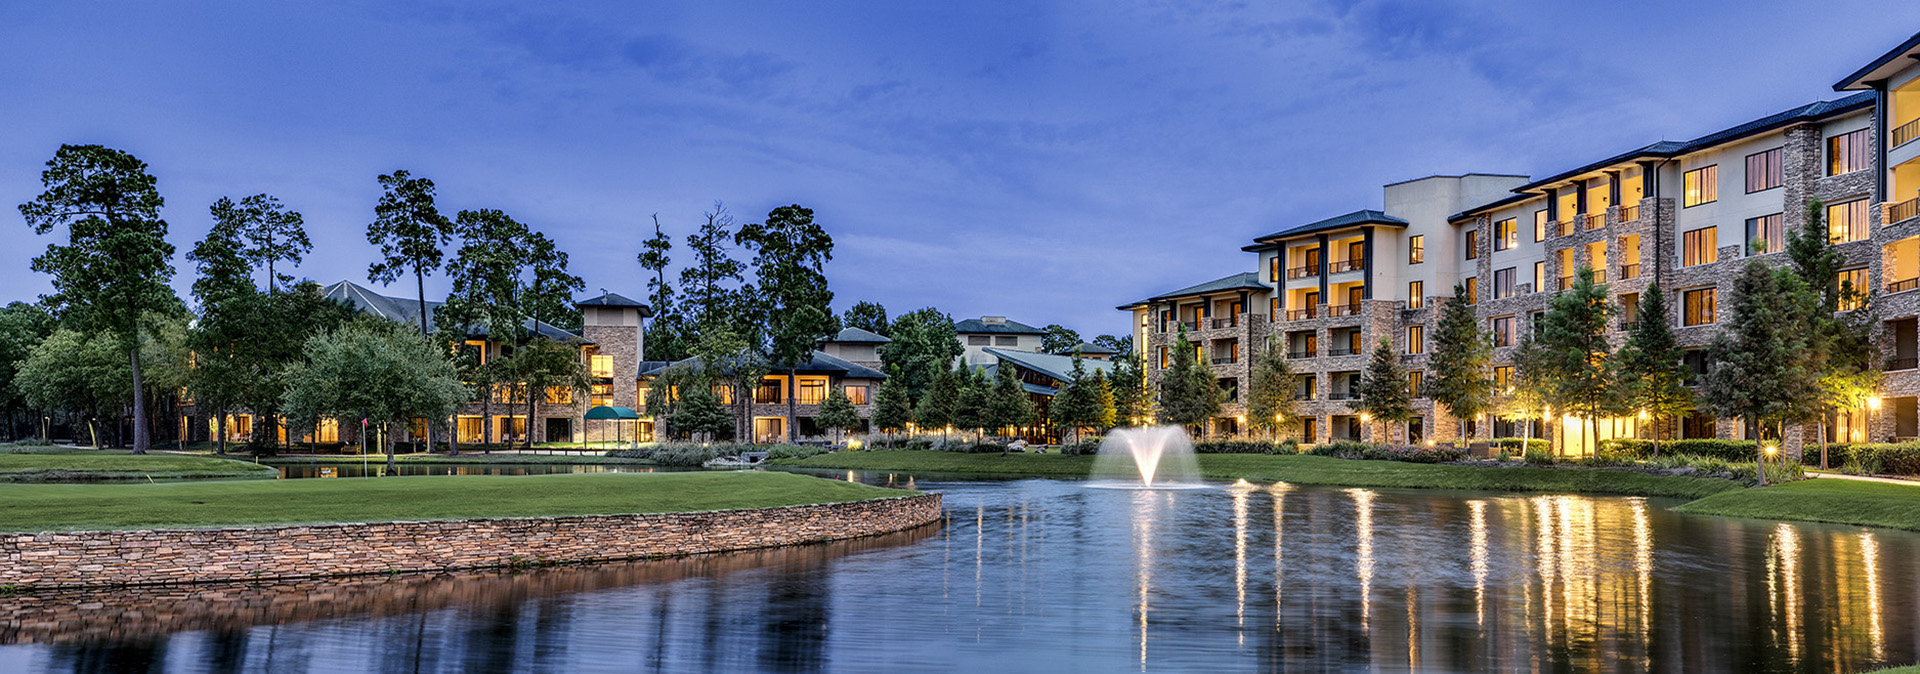 The Woodlands Resort, a landmark destination spanning an expanse of lush acreage in the heart of The Woodlands, today becomes the first Curio Collection by Hilton branded resort in Texas. Credit: Curio Collection by Hilton